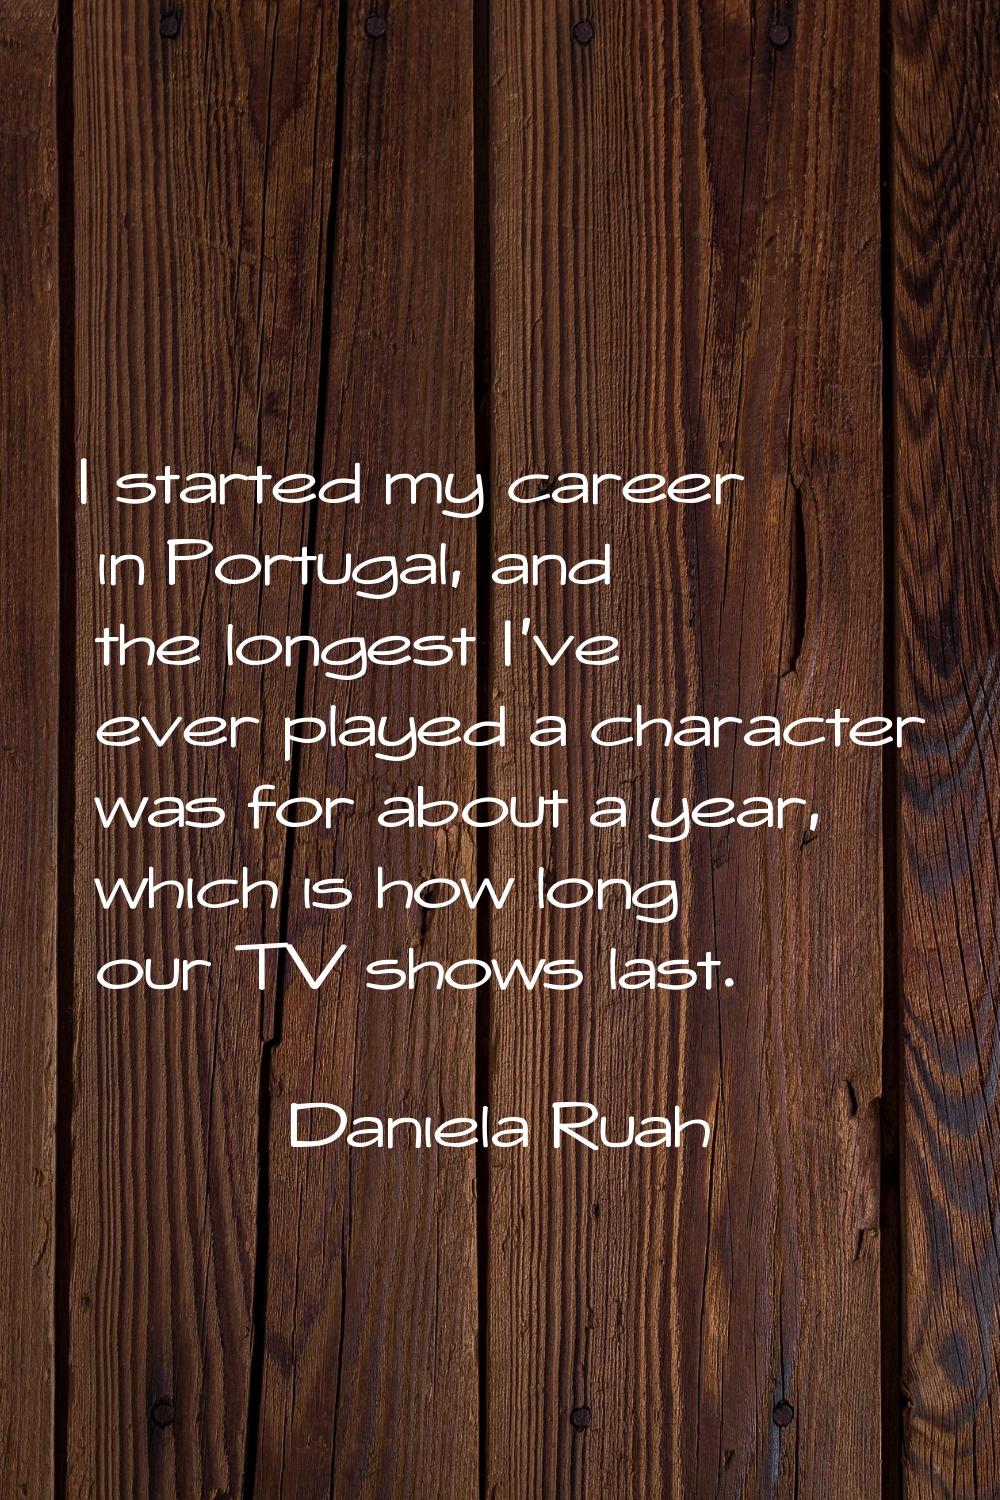 I started my career in Portugal, and the longest I've ever played a character was for about a year,